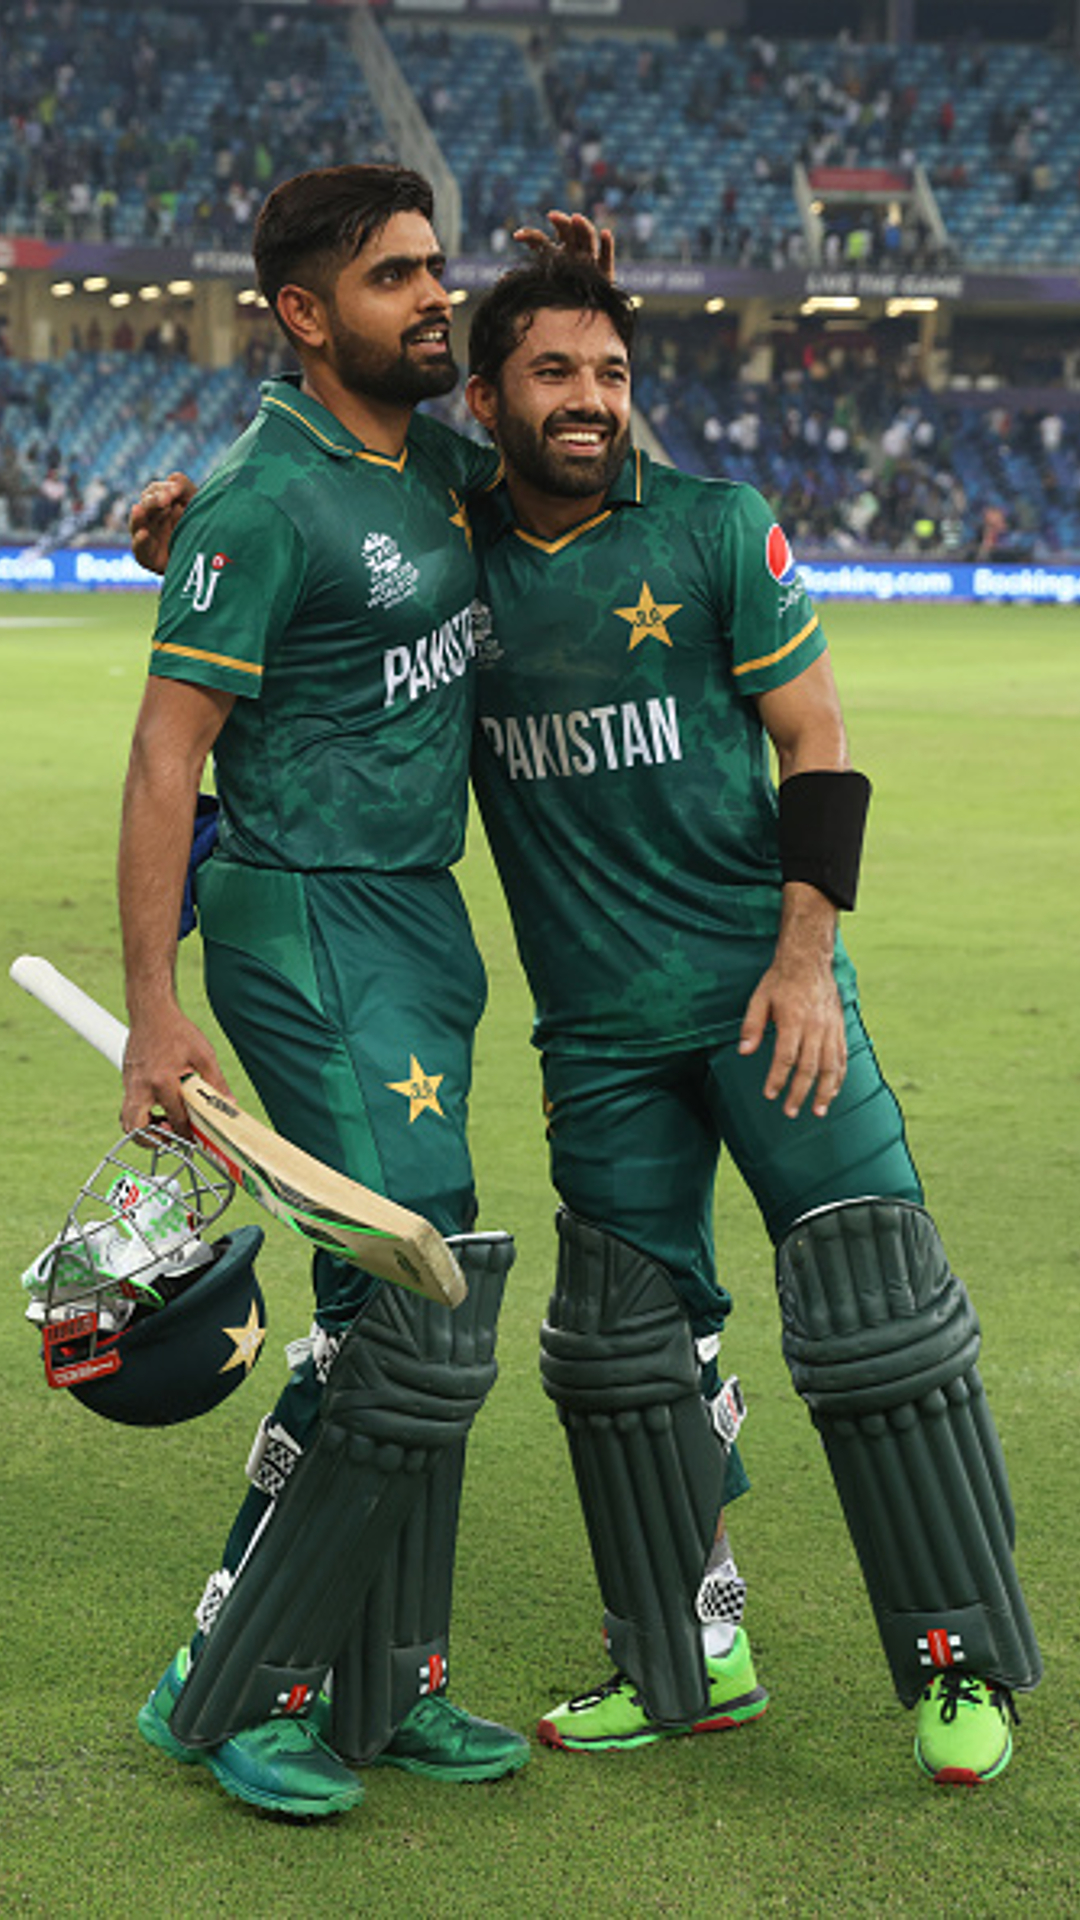 Key Highlights of Pakistan T20 World Cup Journey